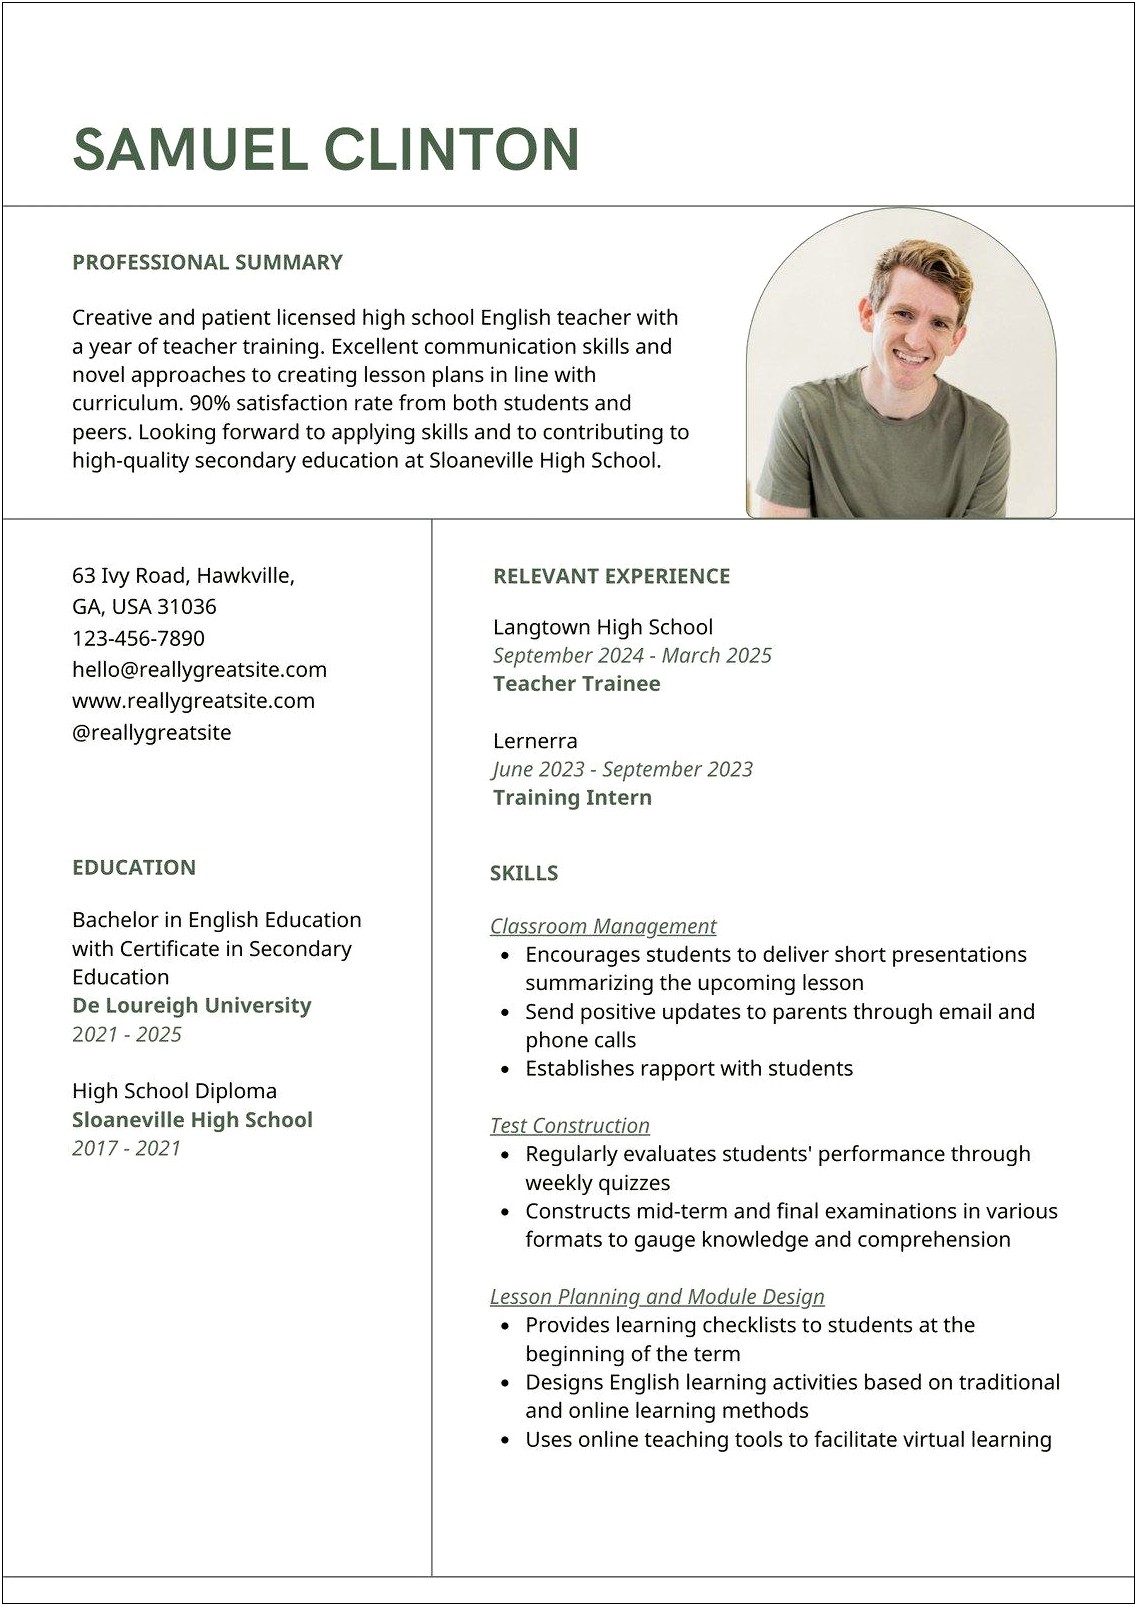 Resume Samples For Experienced Kpo Professionals